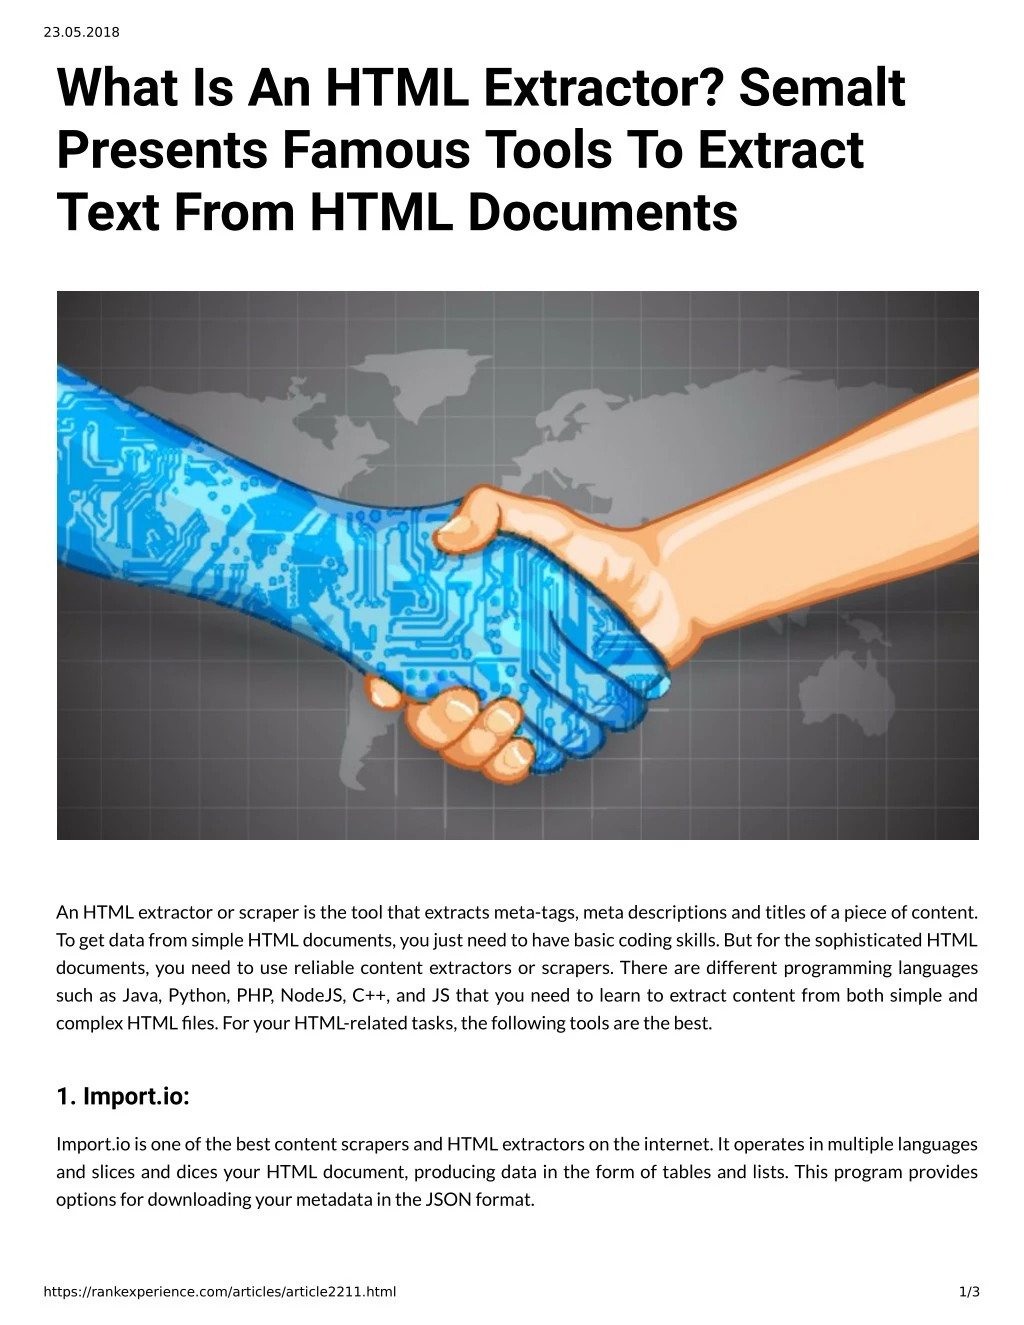 23 05 2018 what is an html extractor semalt